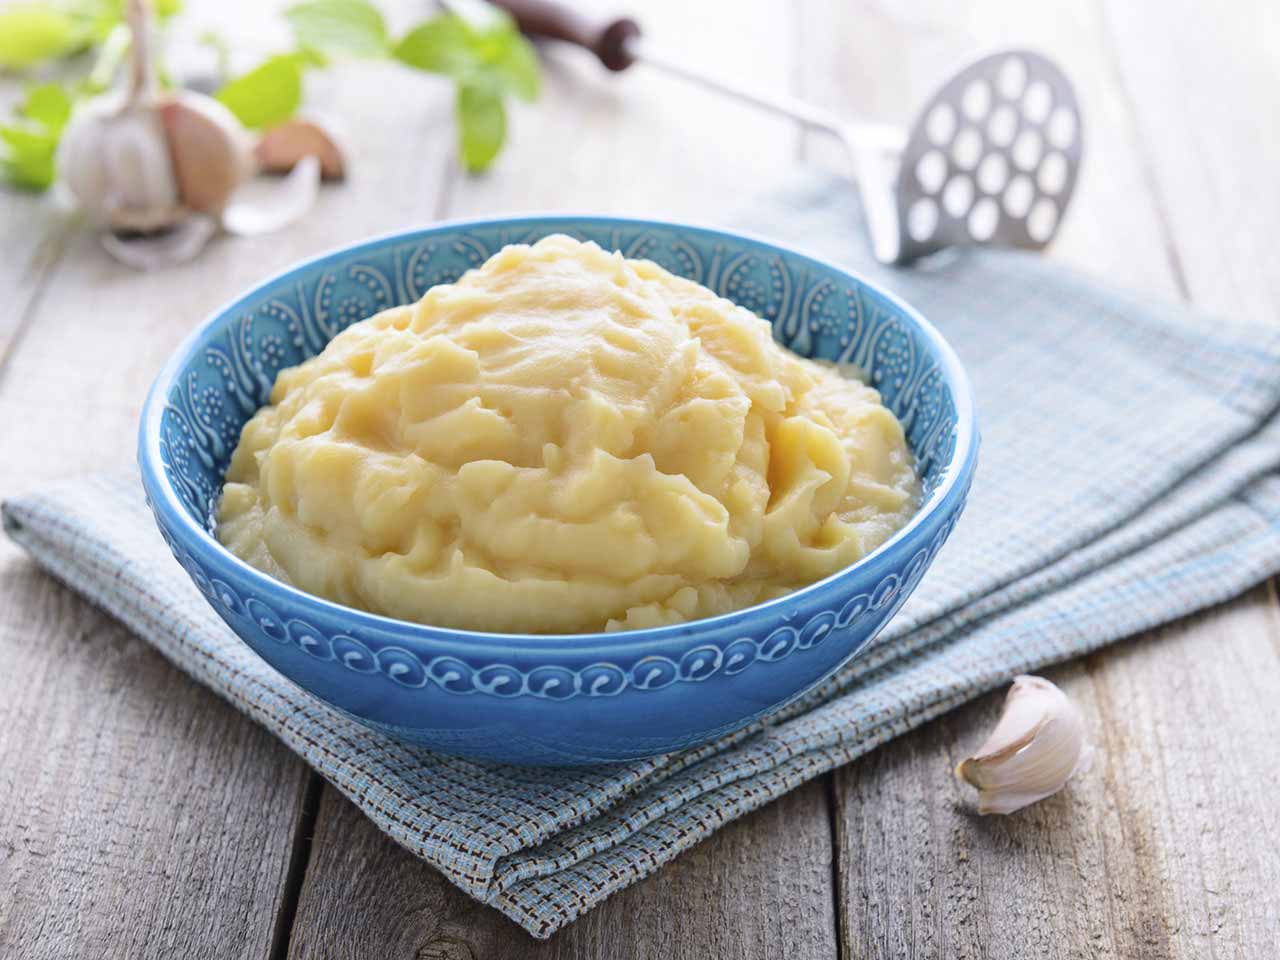 Bowl of mashed potato and a garlic clove on a wooden table